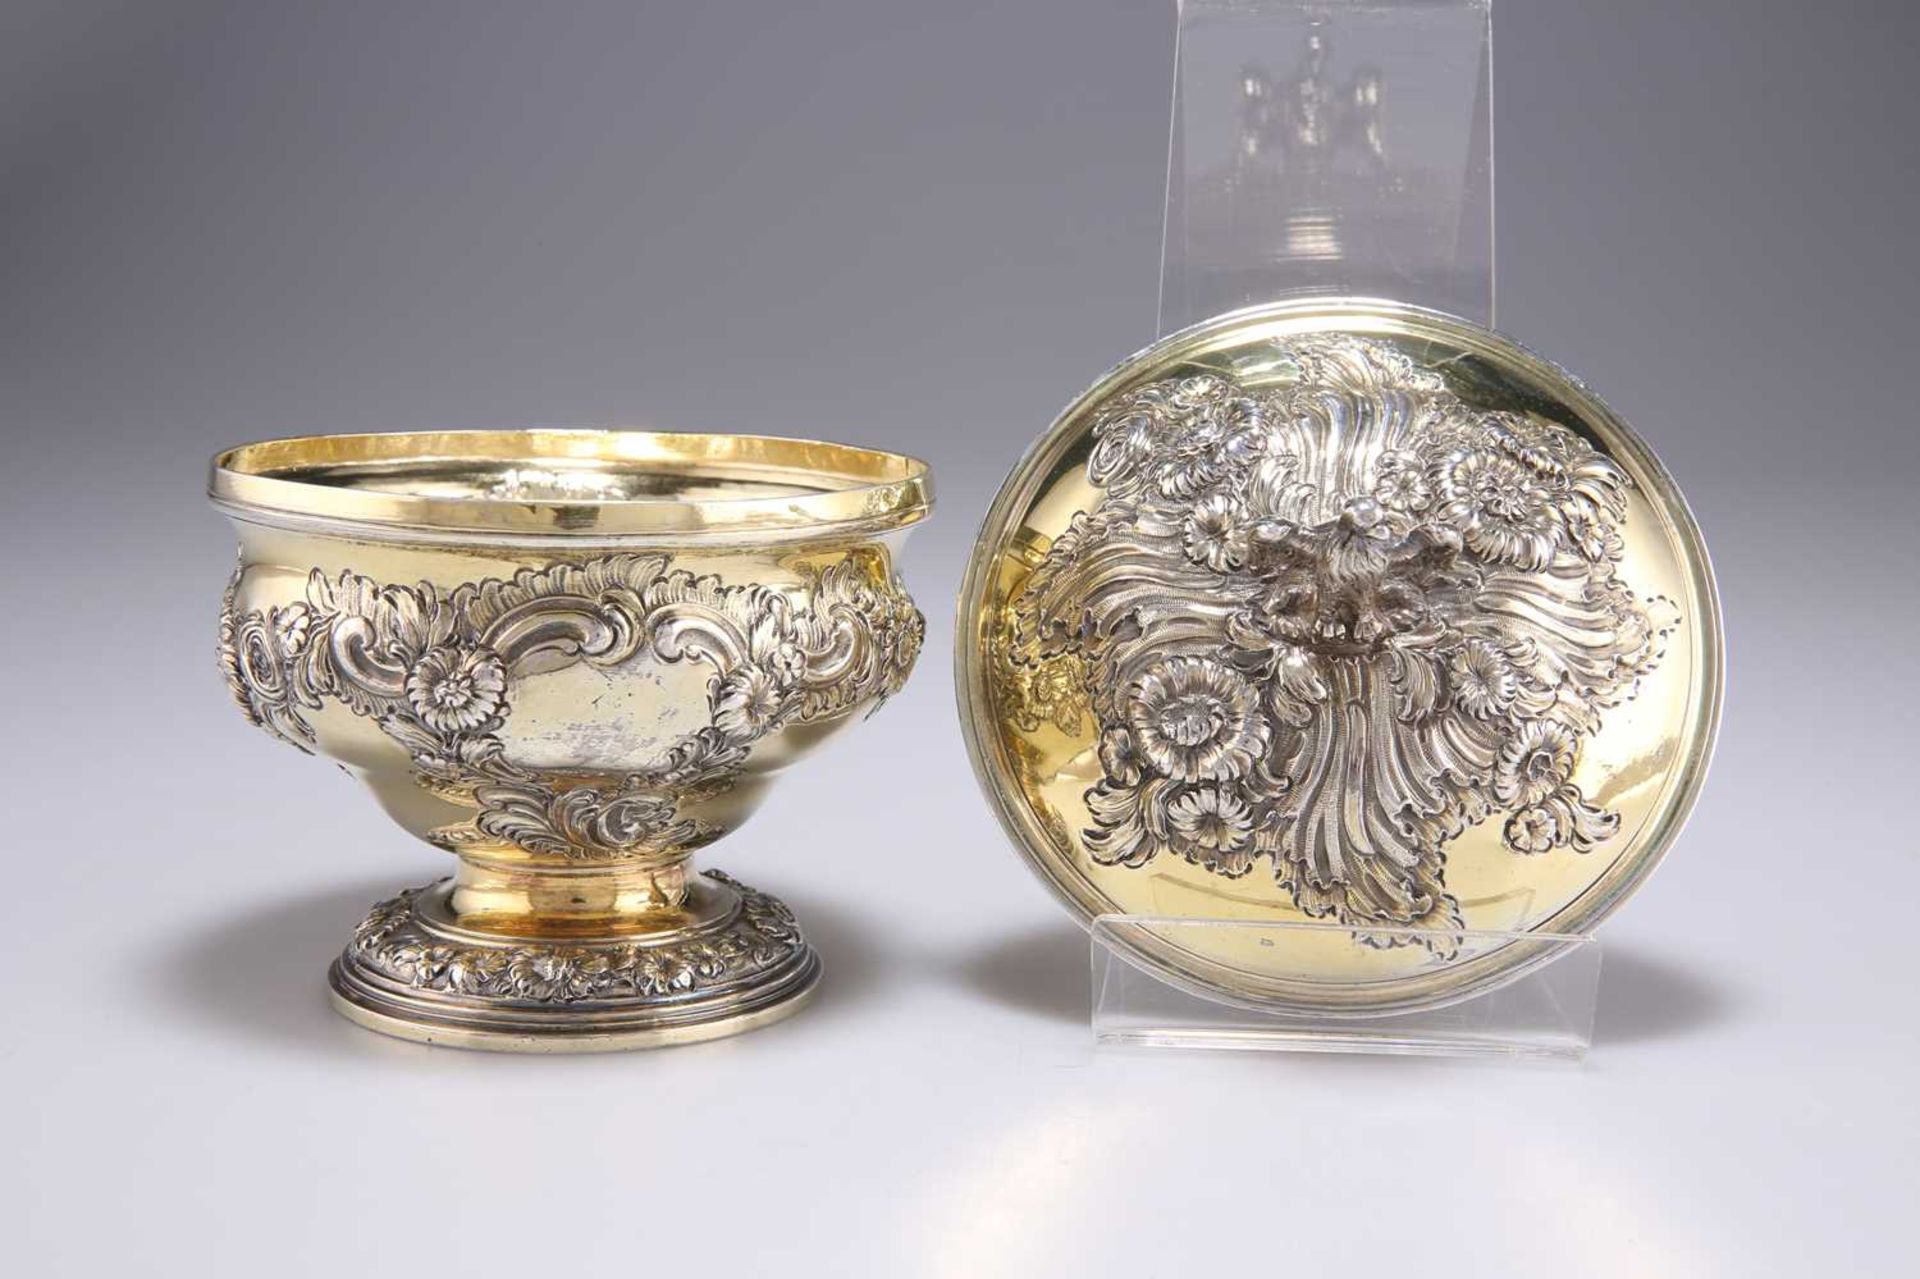 A GEORGE II SILVER-GILT SUGAR BOWL AND COVER - Image 3 of 4